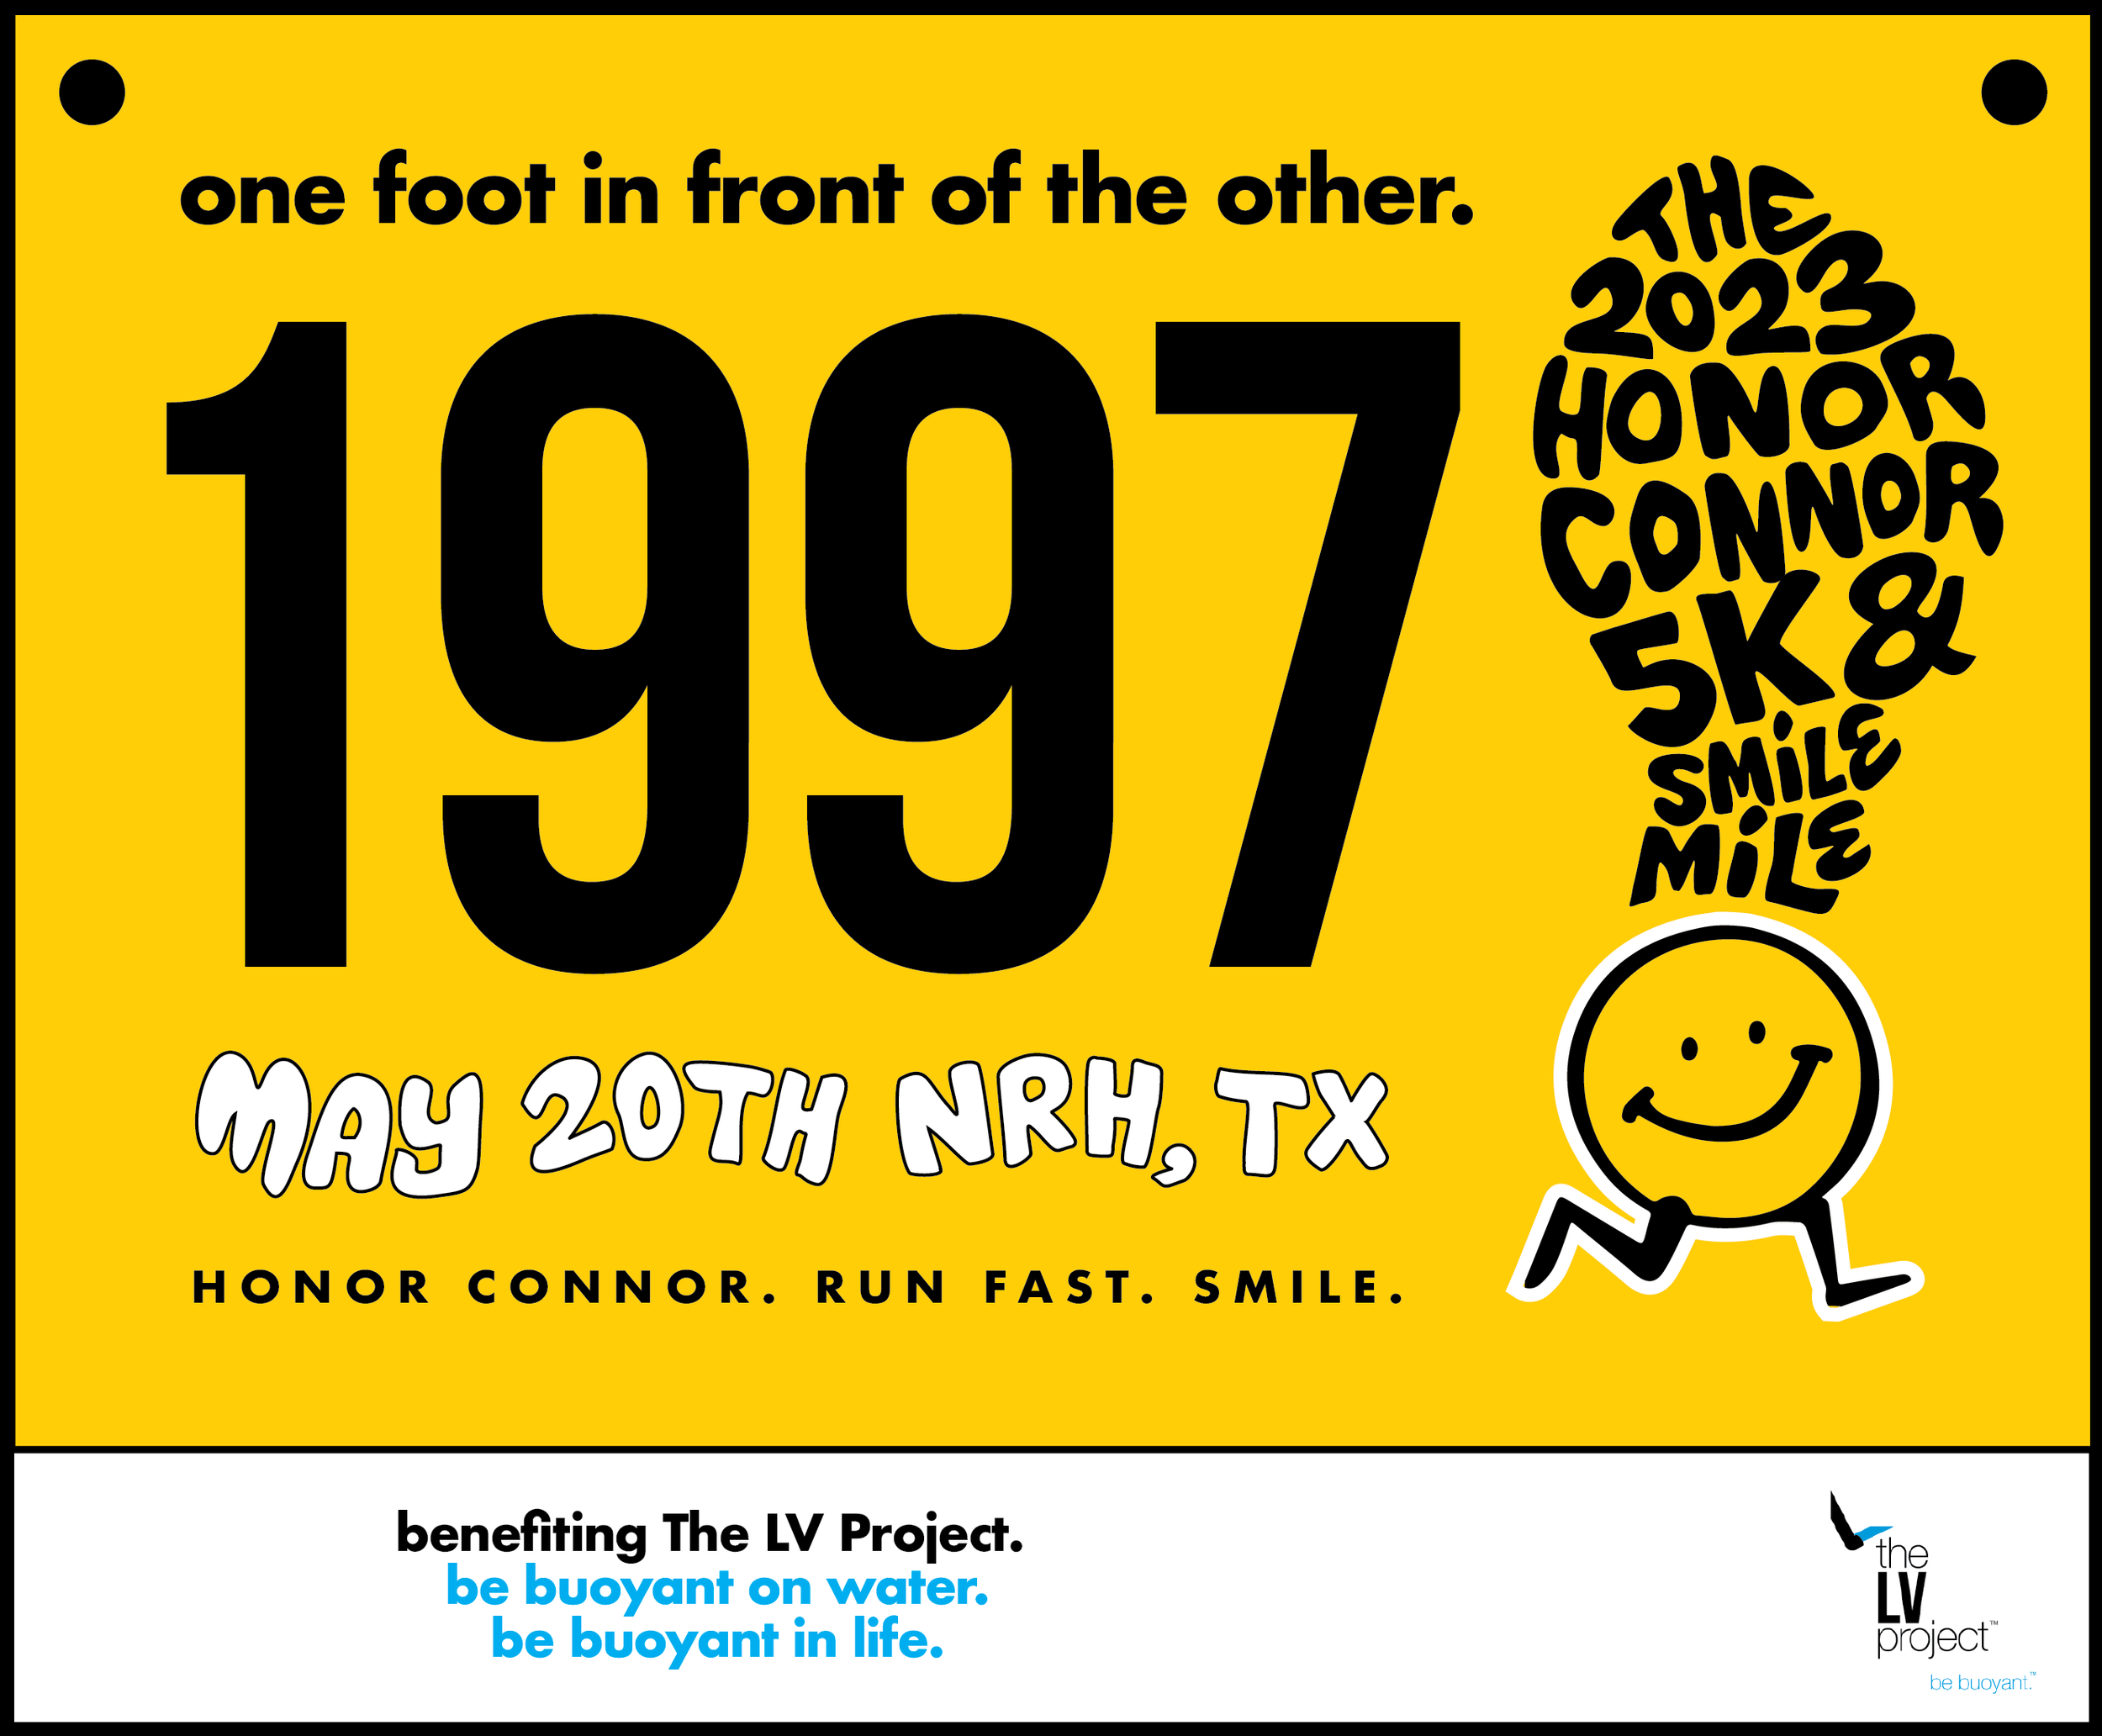 The Honor Connor Run Committee — The Honor Connor 5k & Smile Mile